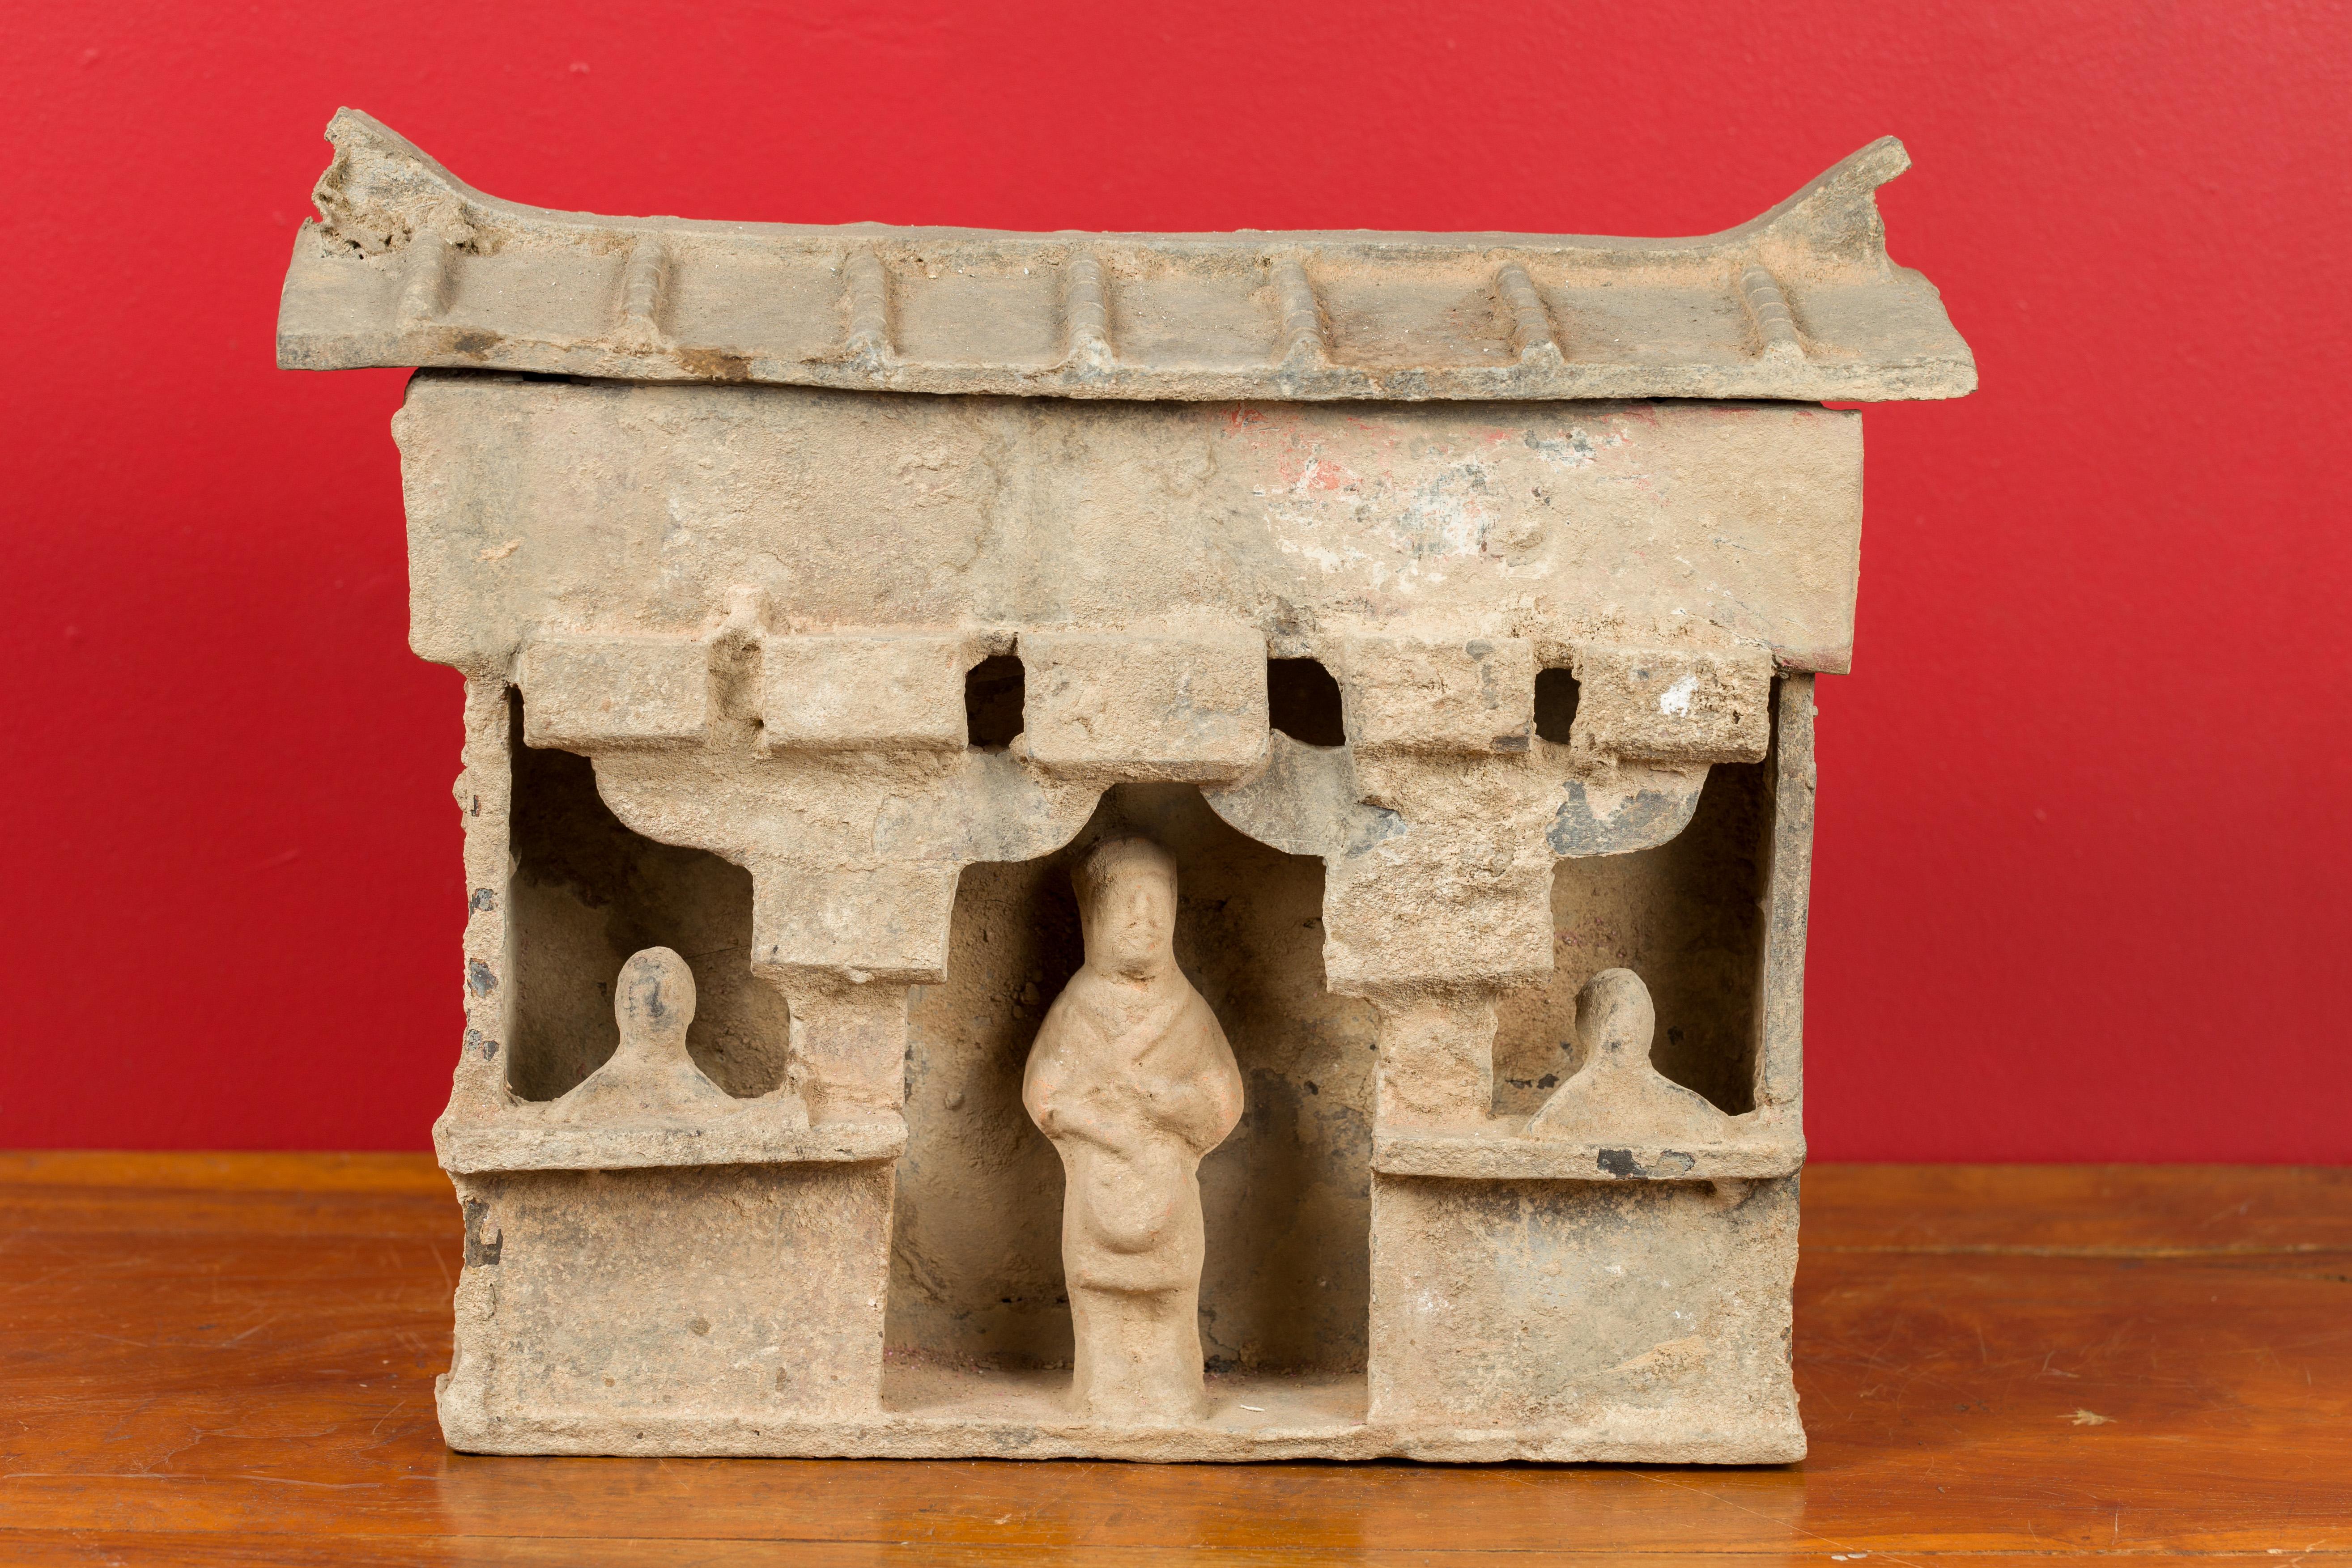 A Chinese Han dynasty house model with its occupants and removable roof, circa 202 BC-200 AD. Crafted during the Han dynasty, this mingqi house model features a removable roof sitting above an open room. Standing in front of each opening (a central